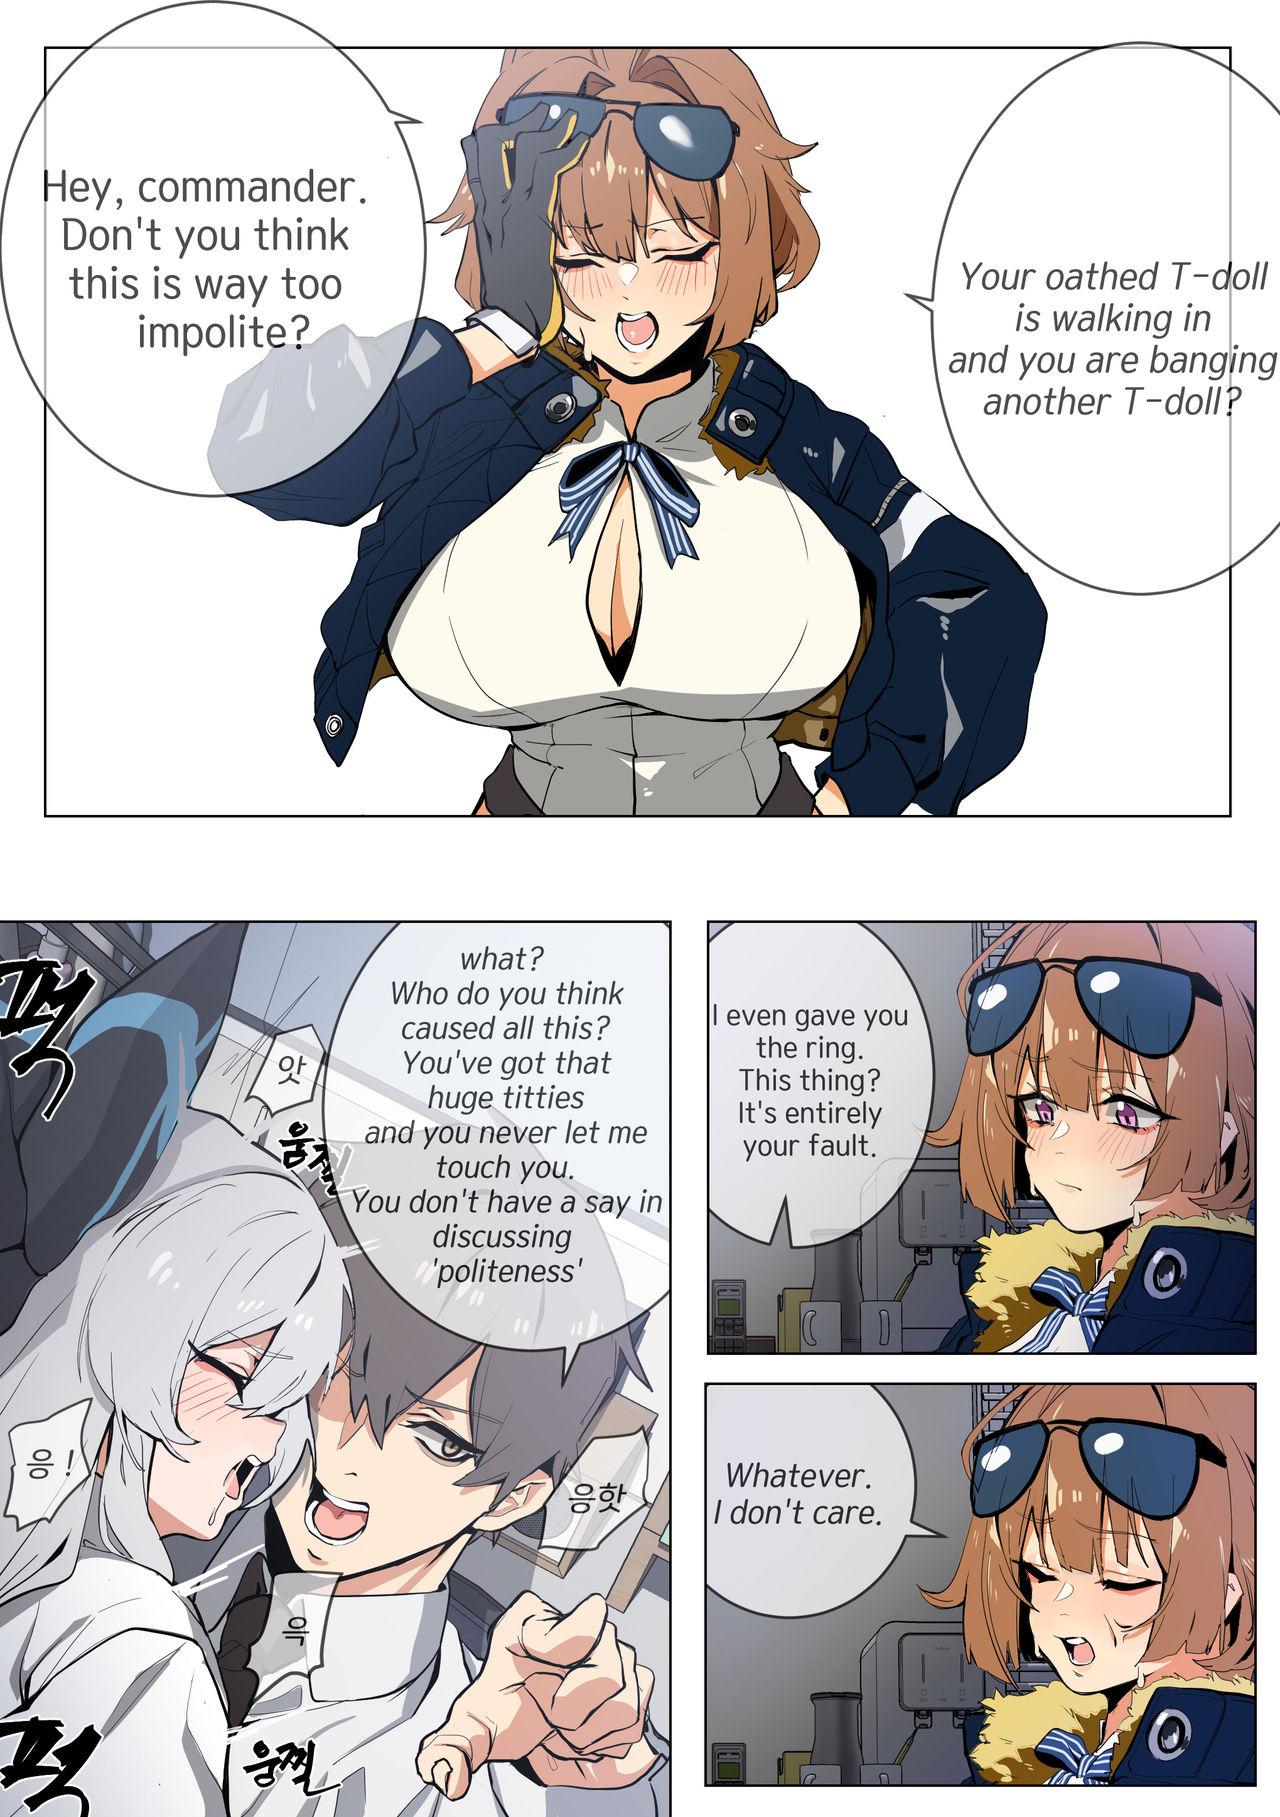 Doctor Grizzly - Girls frontline Handsome - Page 3